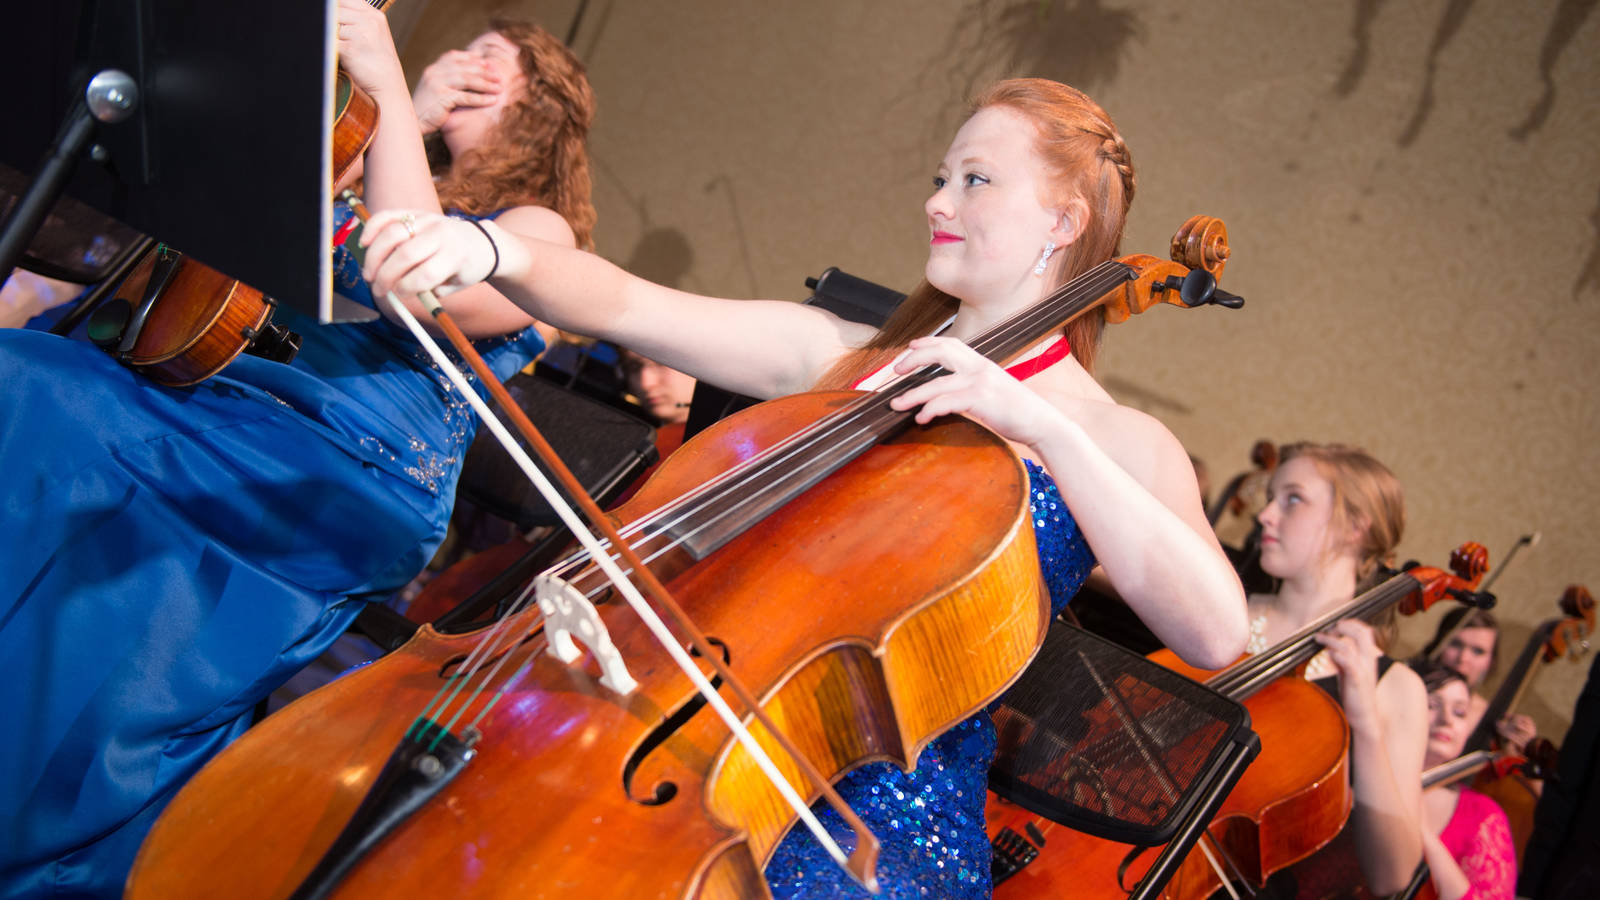 A cellist playing in an ensemble at the Viennese Ball at UW-Eau Claire